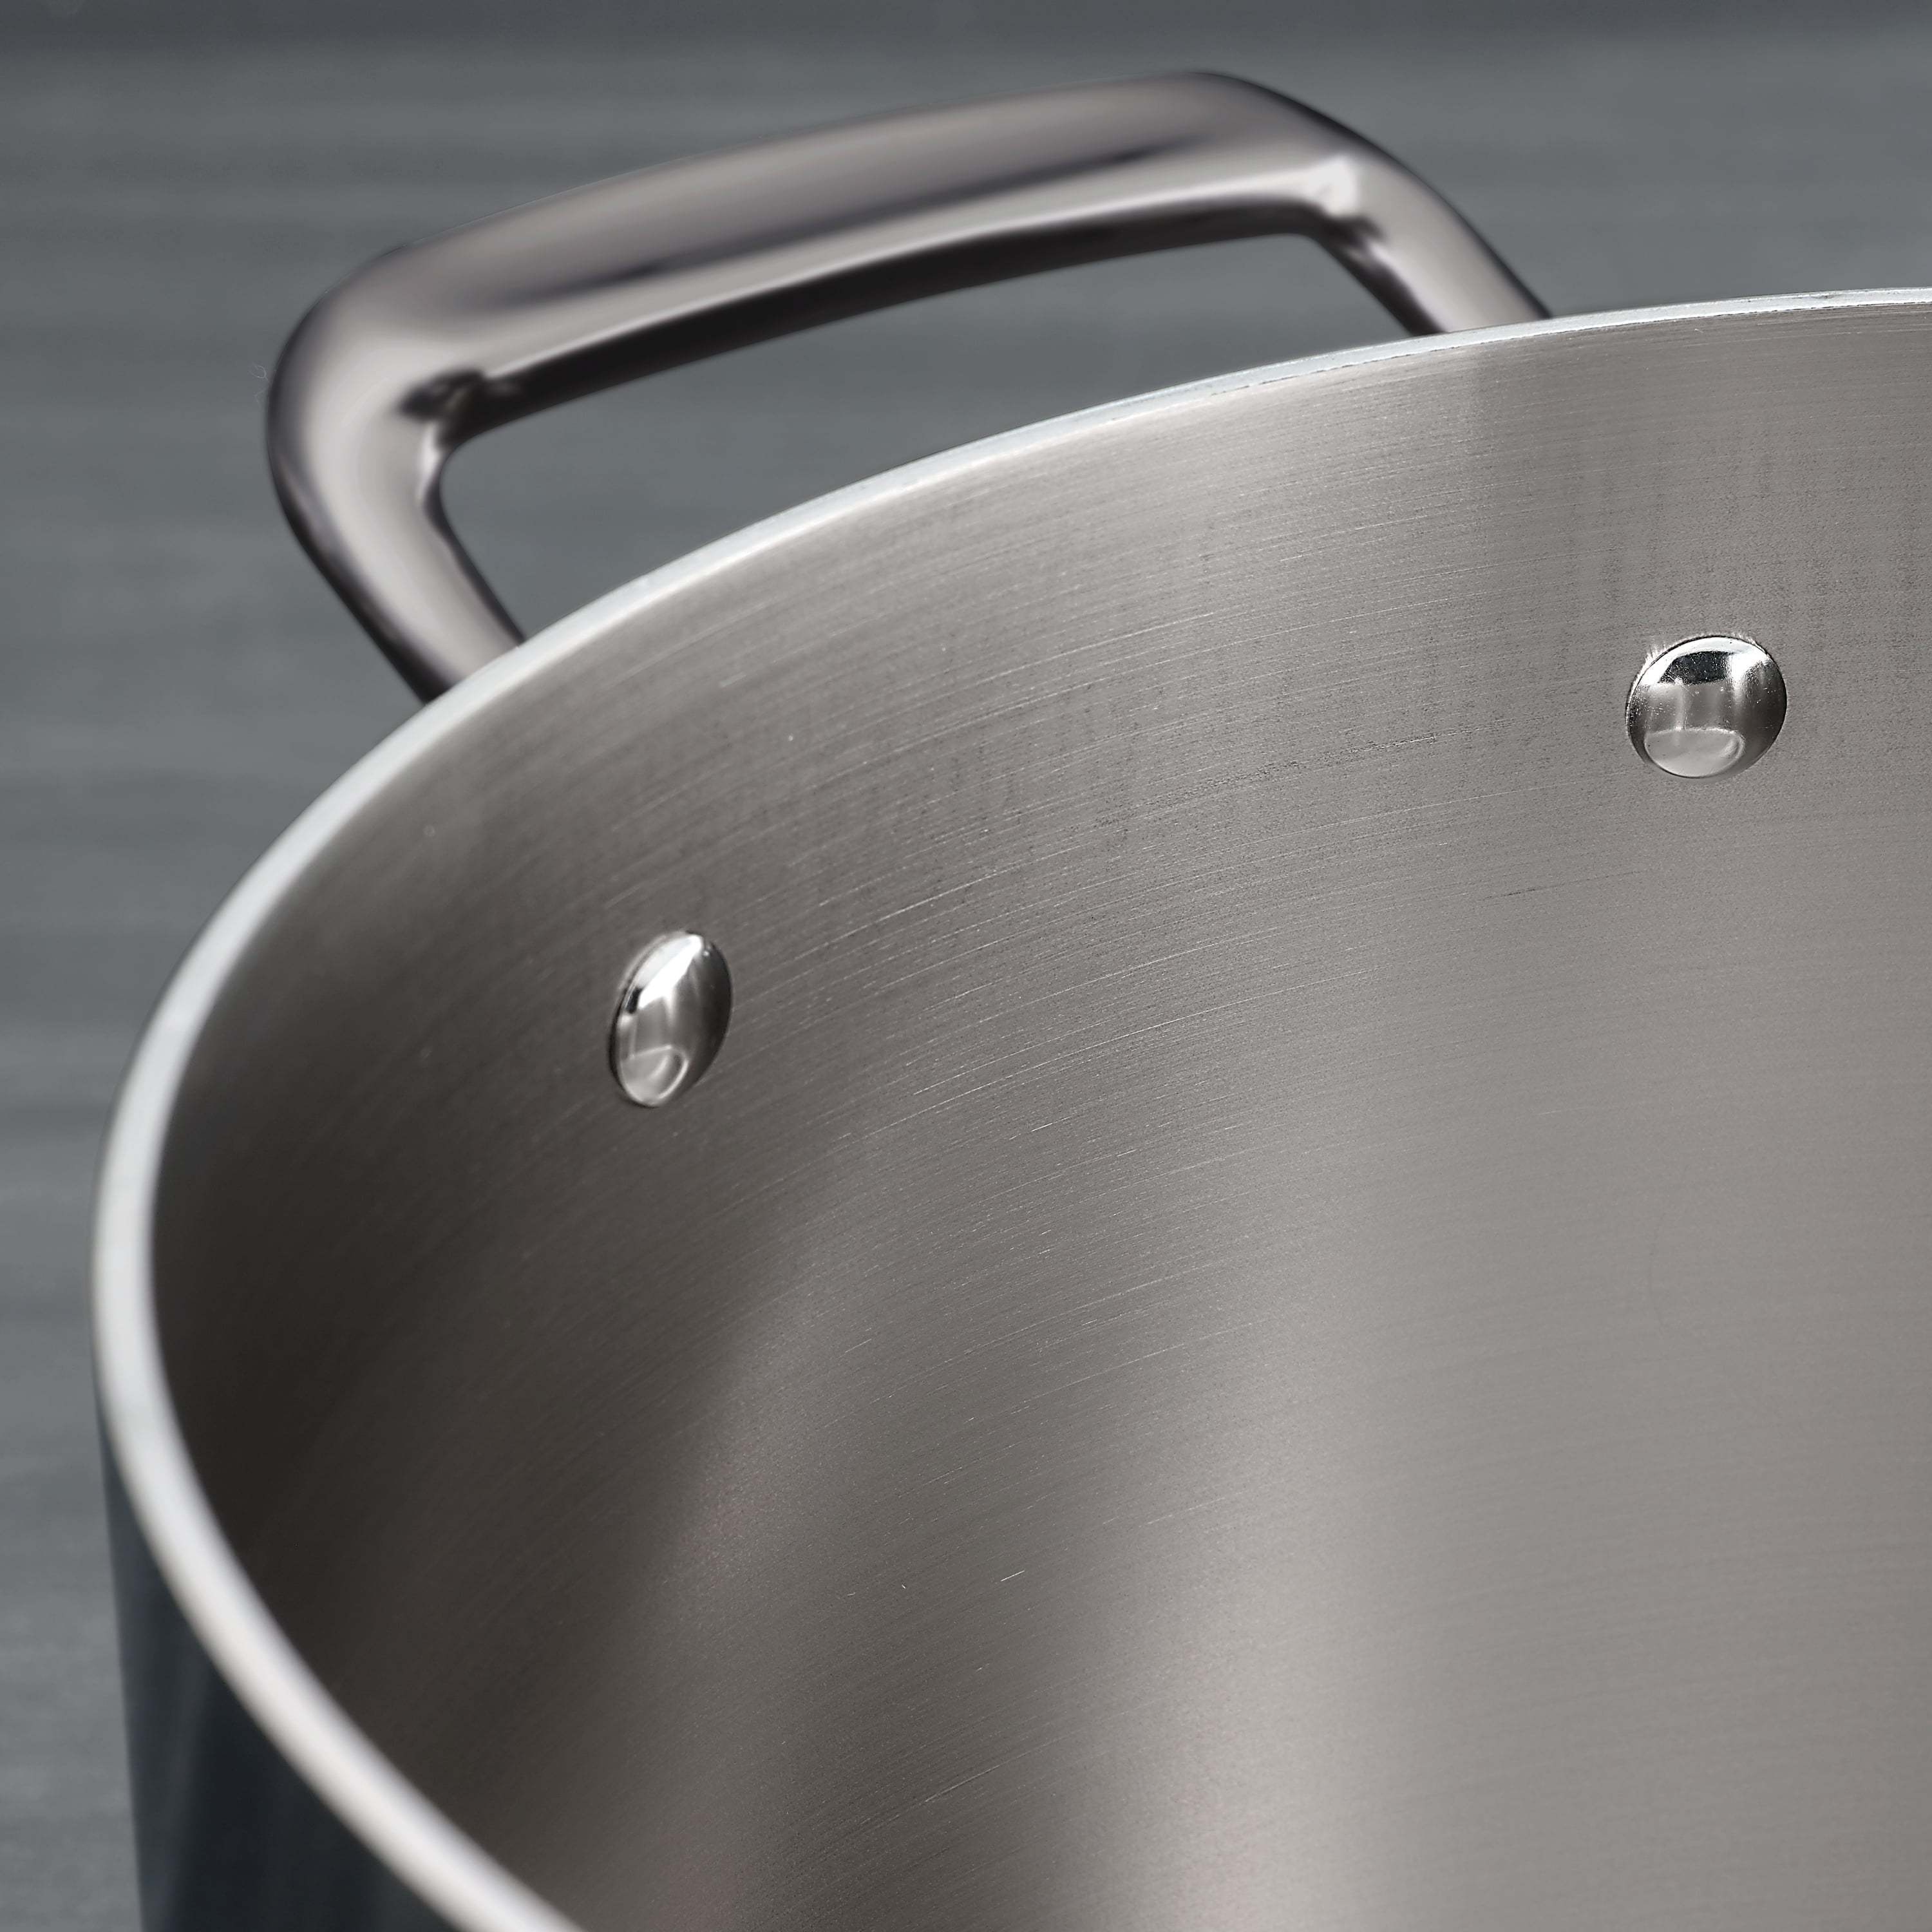 Tramontina Tri-Ply Clad 8 Qt Covered Stainless Steel StockPot